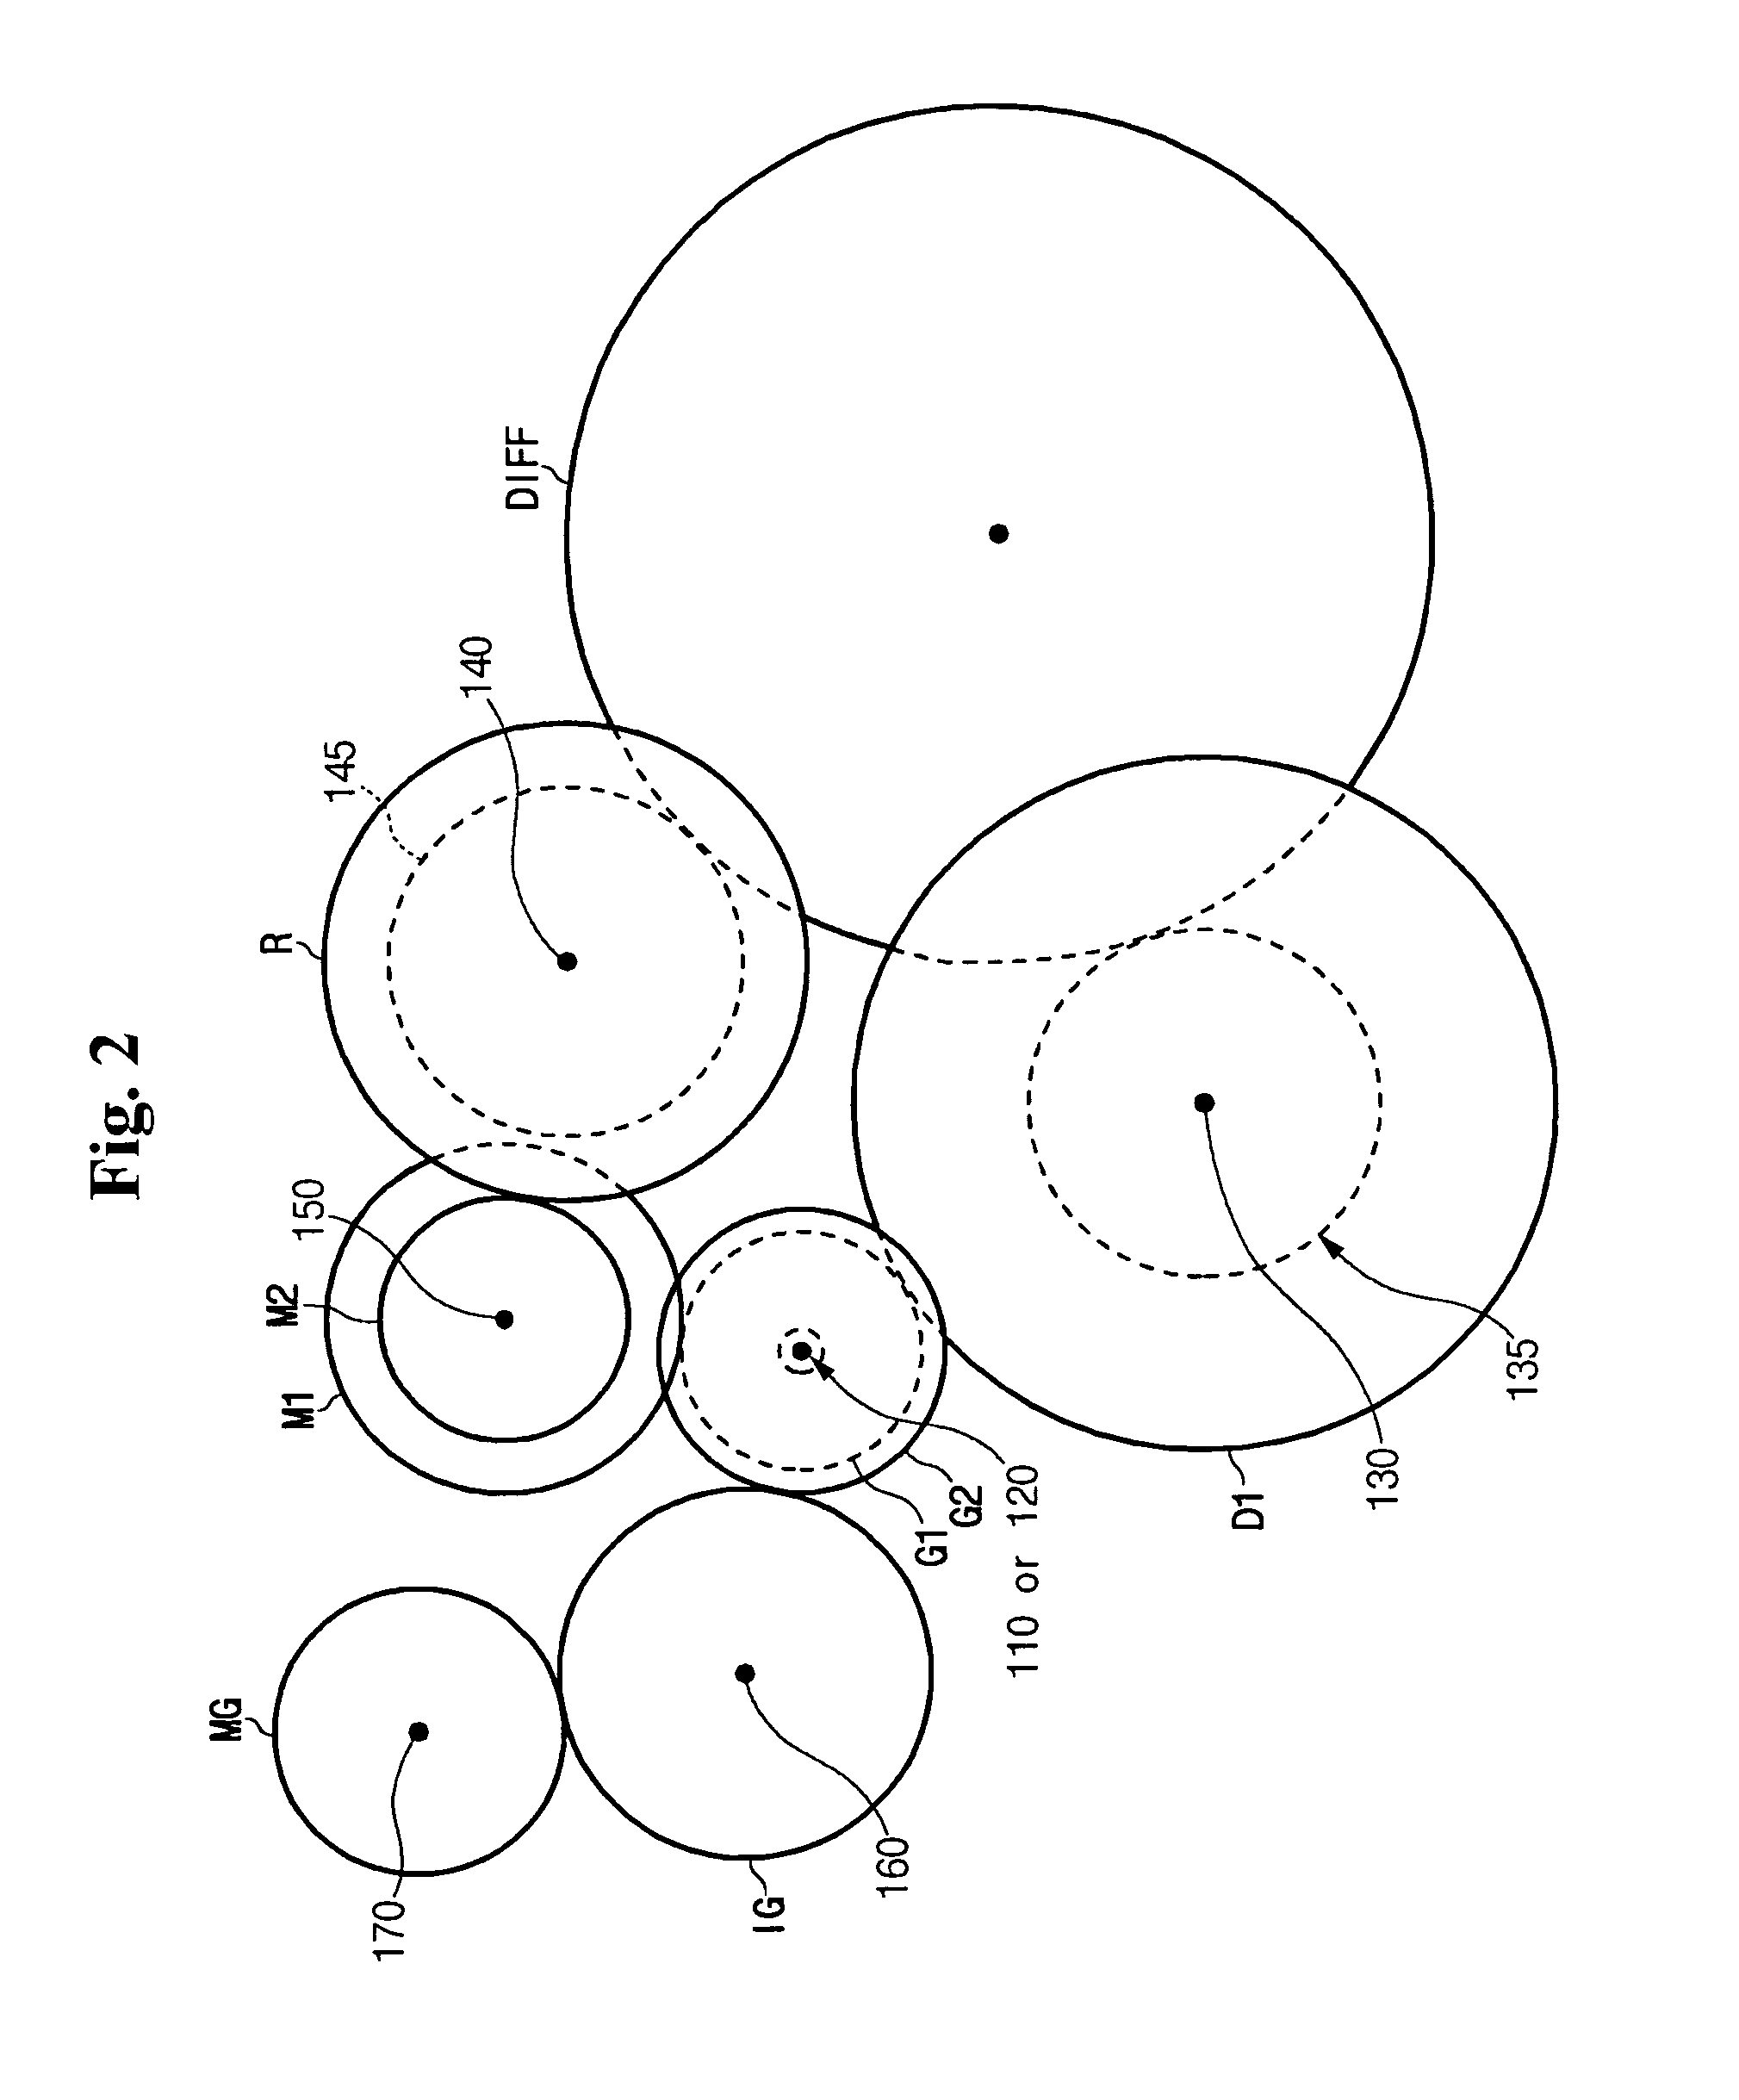 Double clutch transmission for a hybrid electric vehicle and method for operating the same